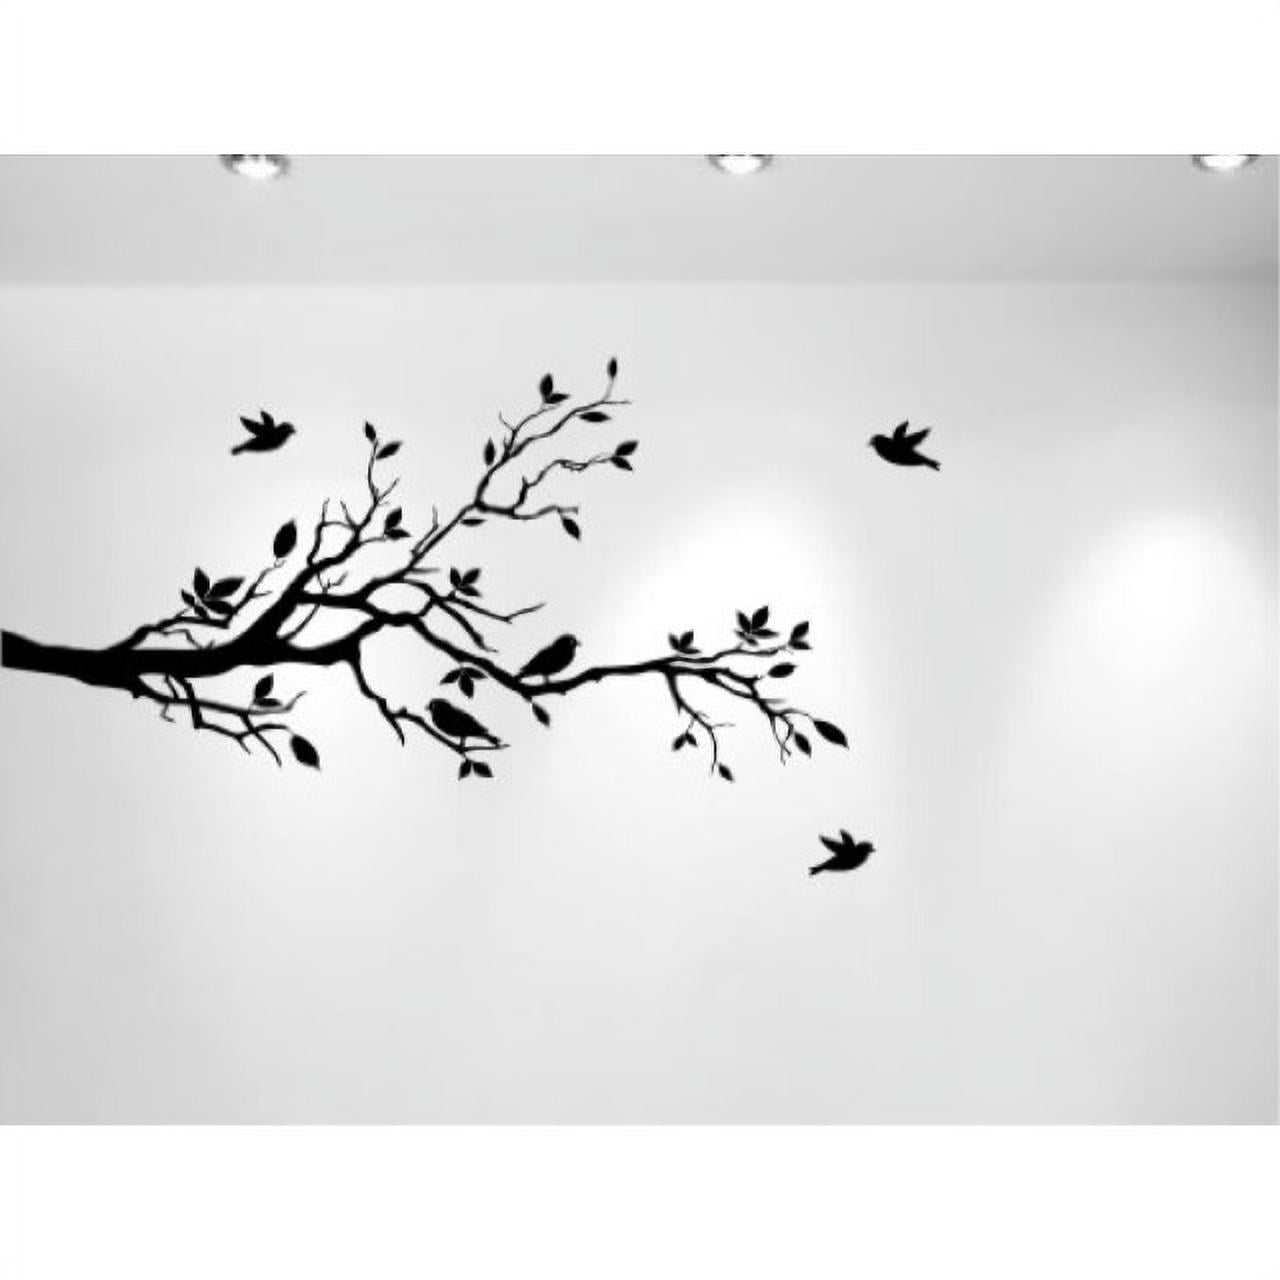 Black Bird Tree Branch Wall Stickers Decal Removable Home Decor Mural 14"x23" 